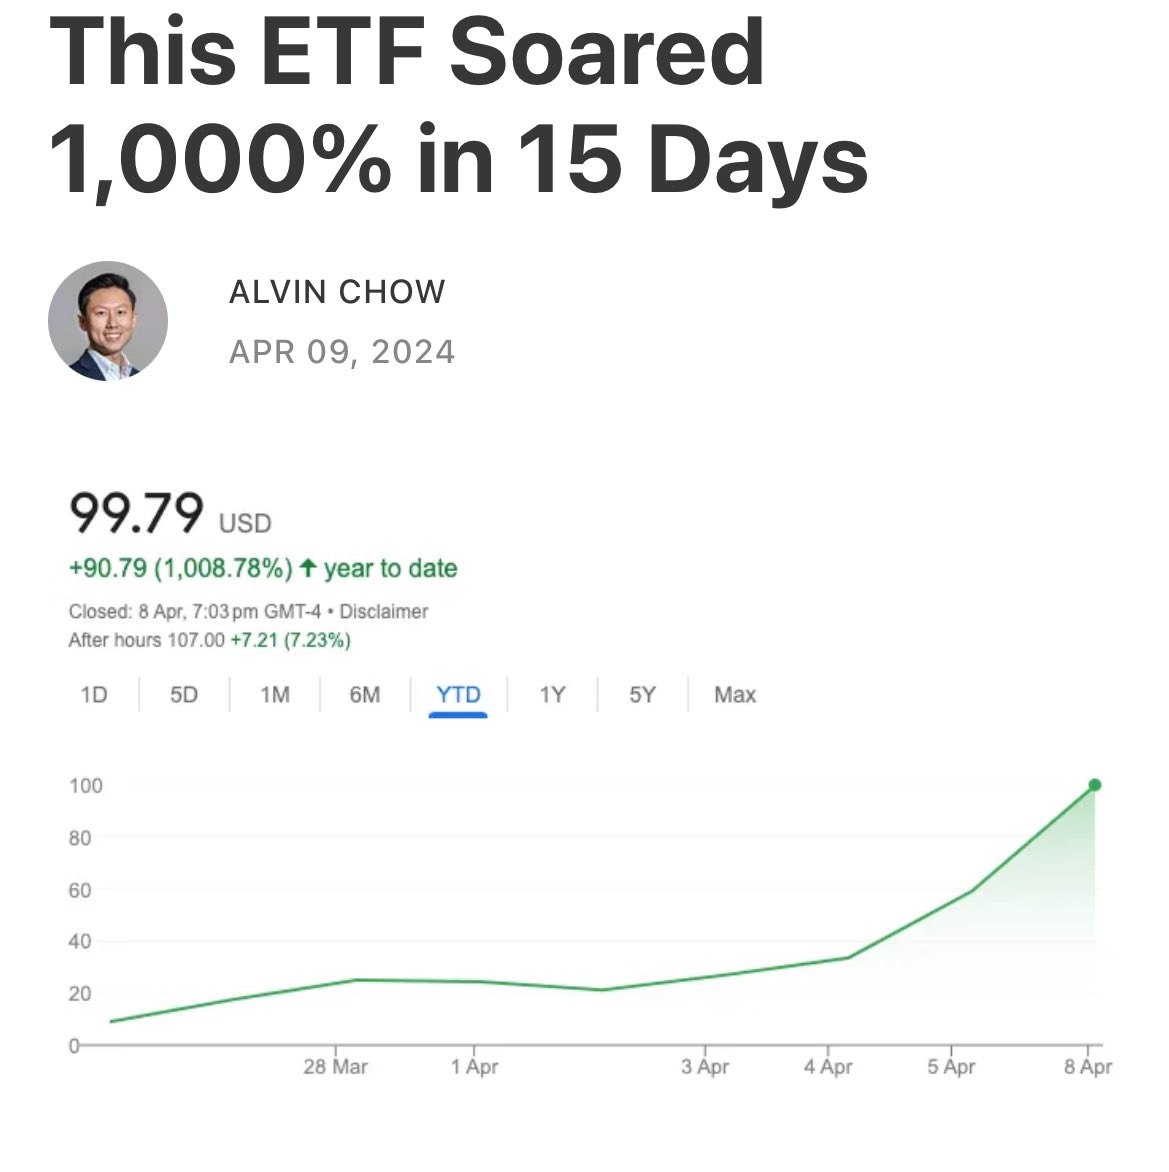 No, this is not a Bitcoin ETF. This ETF invests in private equity and it is trading at a 23x premium over its NAV. finbiteinsights.substack.com/p/this-etf-soa…